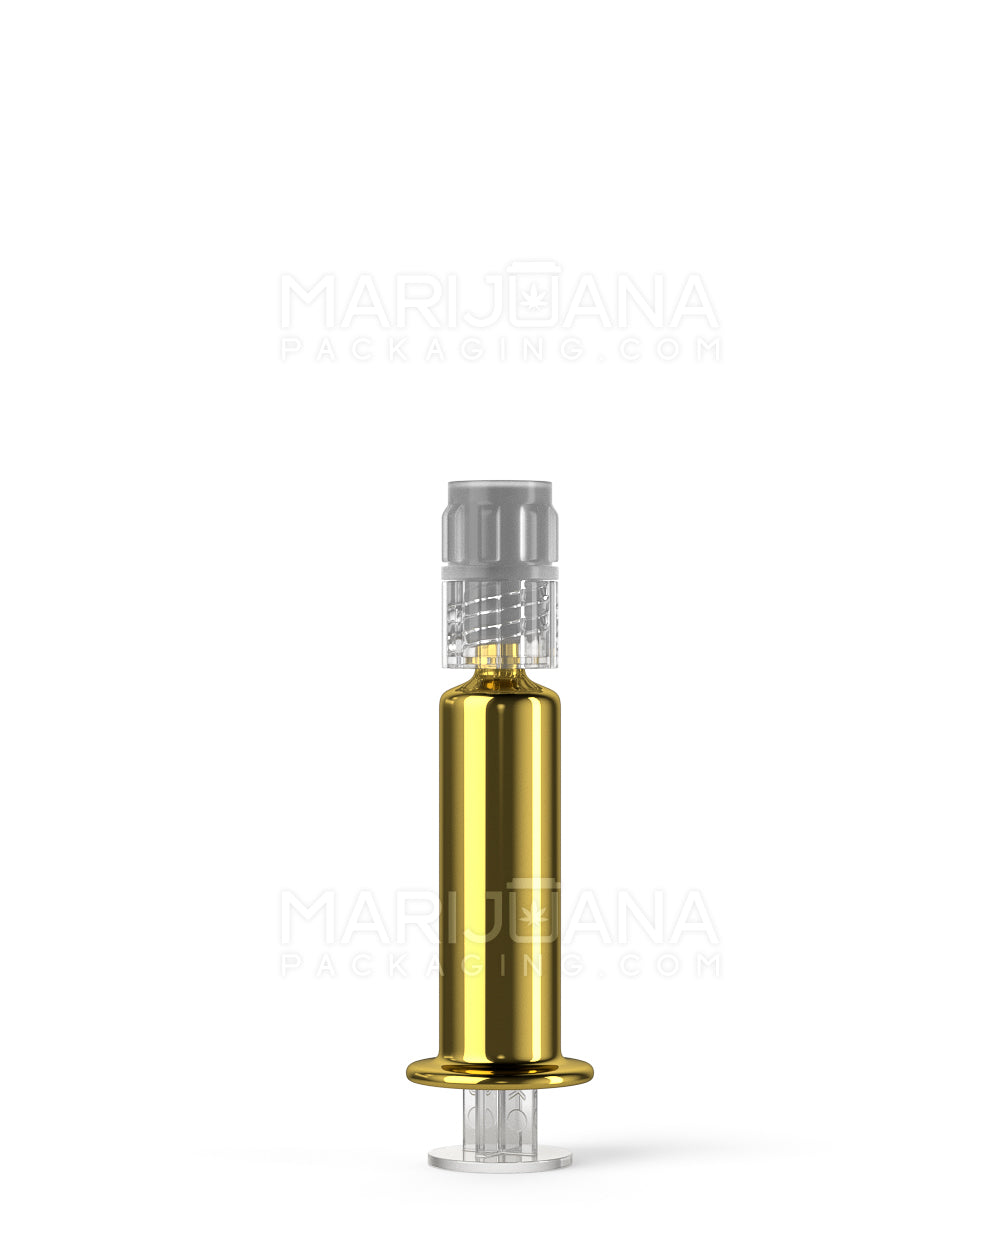 Luer Lock | Gold Glass Dab Applicator Syringes | 1mL - No Measurements - 100 Count - 7